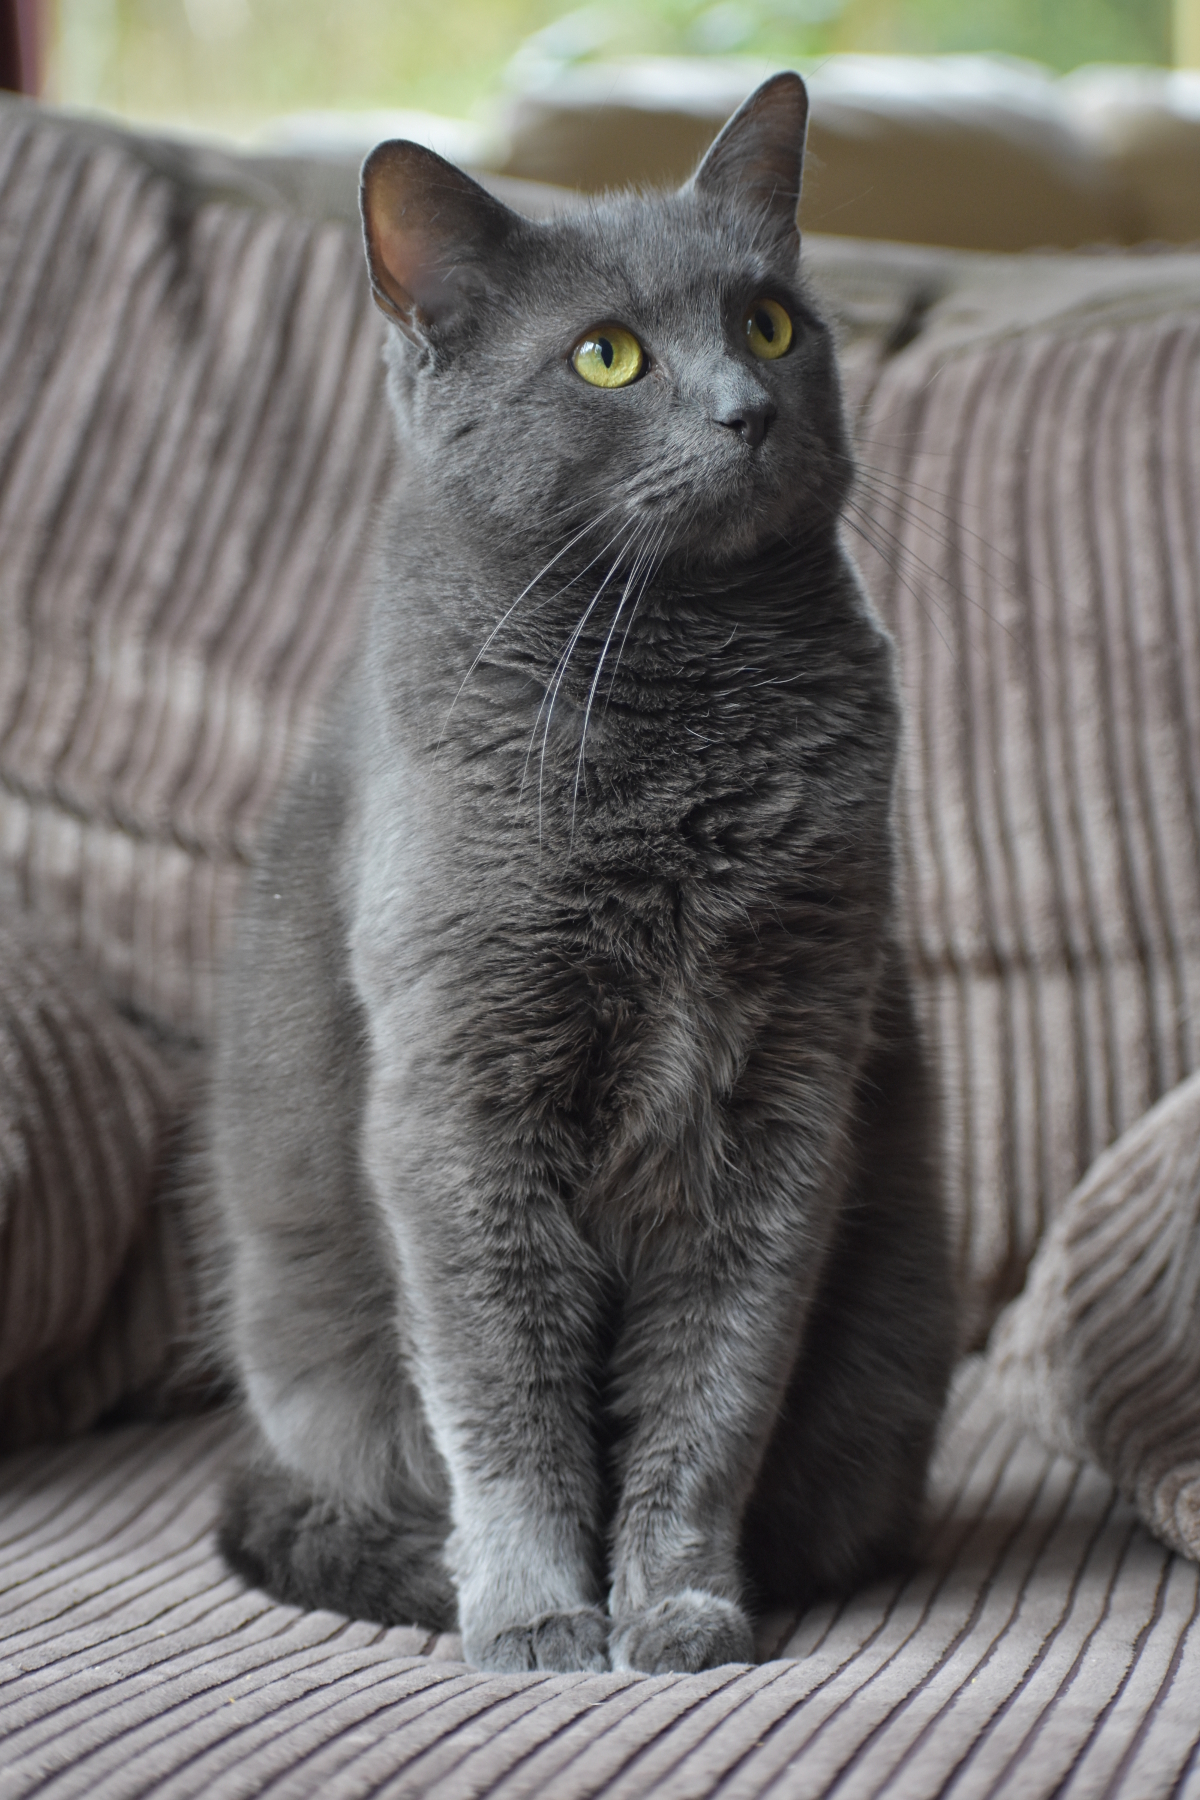 Russian Blue Korat Or Chartreux Thecatsite